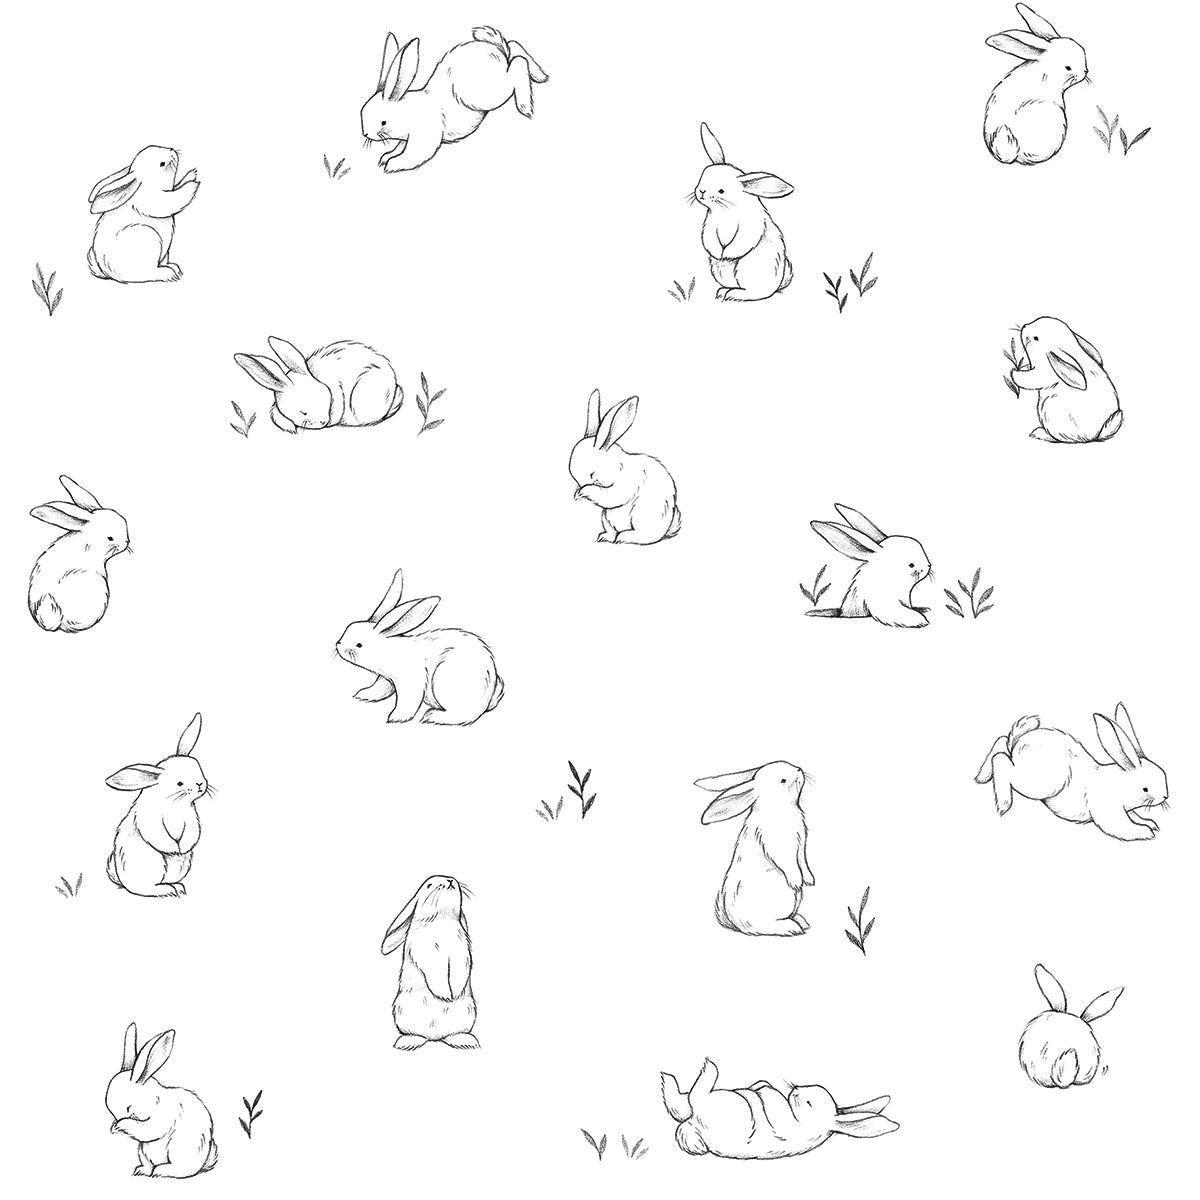 Lilipinso Wallpaper (50 Cm X 10 M) - Bunnies In The Countryside